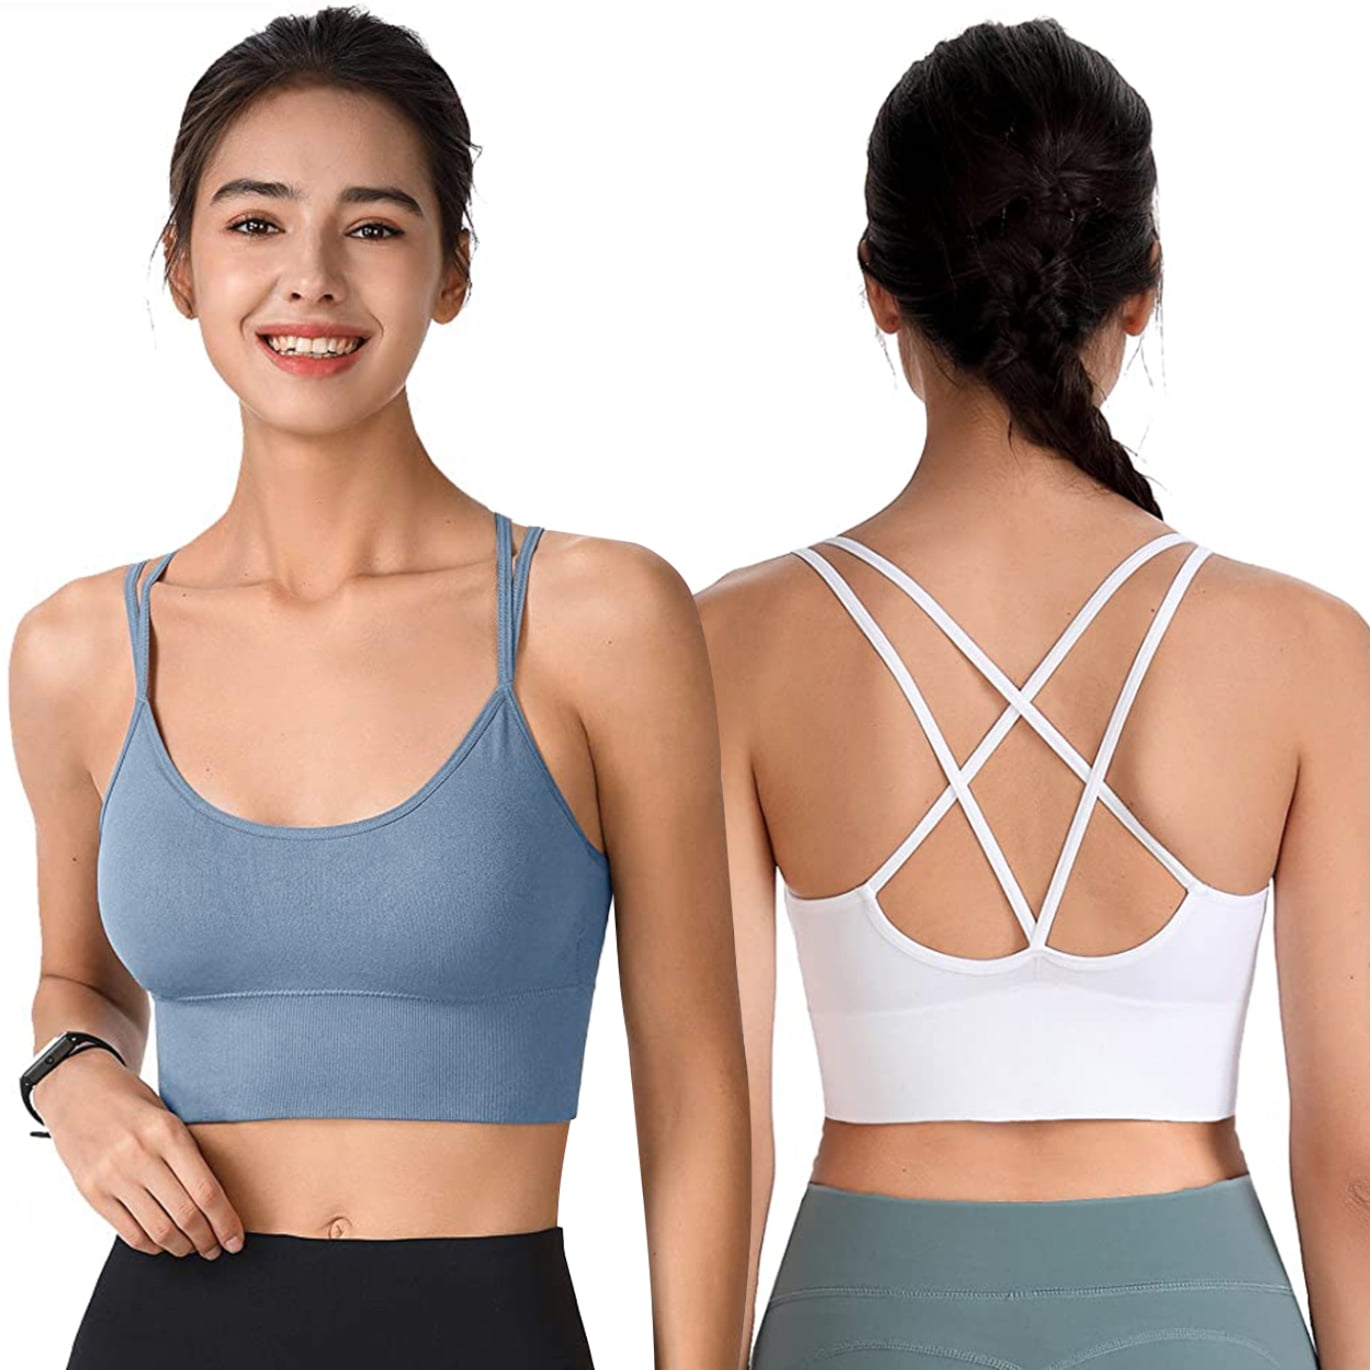 361 Women's Sports Bra Vest With Built-in Bra Pads For Yoga Fitness,  Anti-sagging, Lightweight, Breathable And Skin-friendly